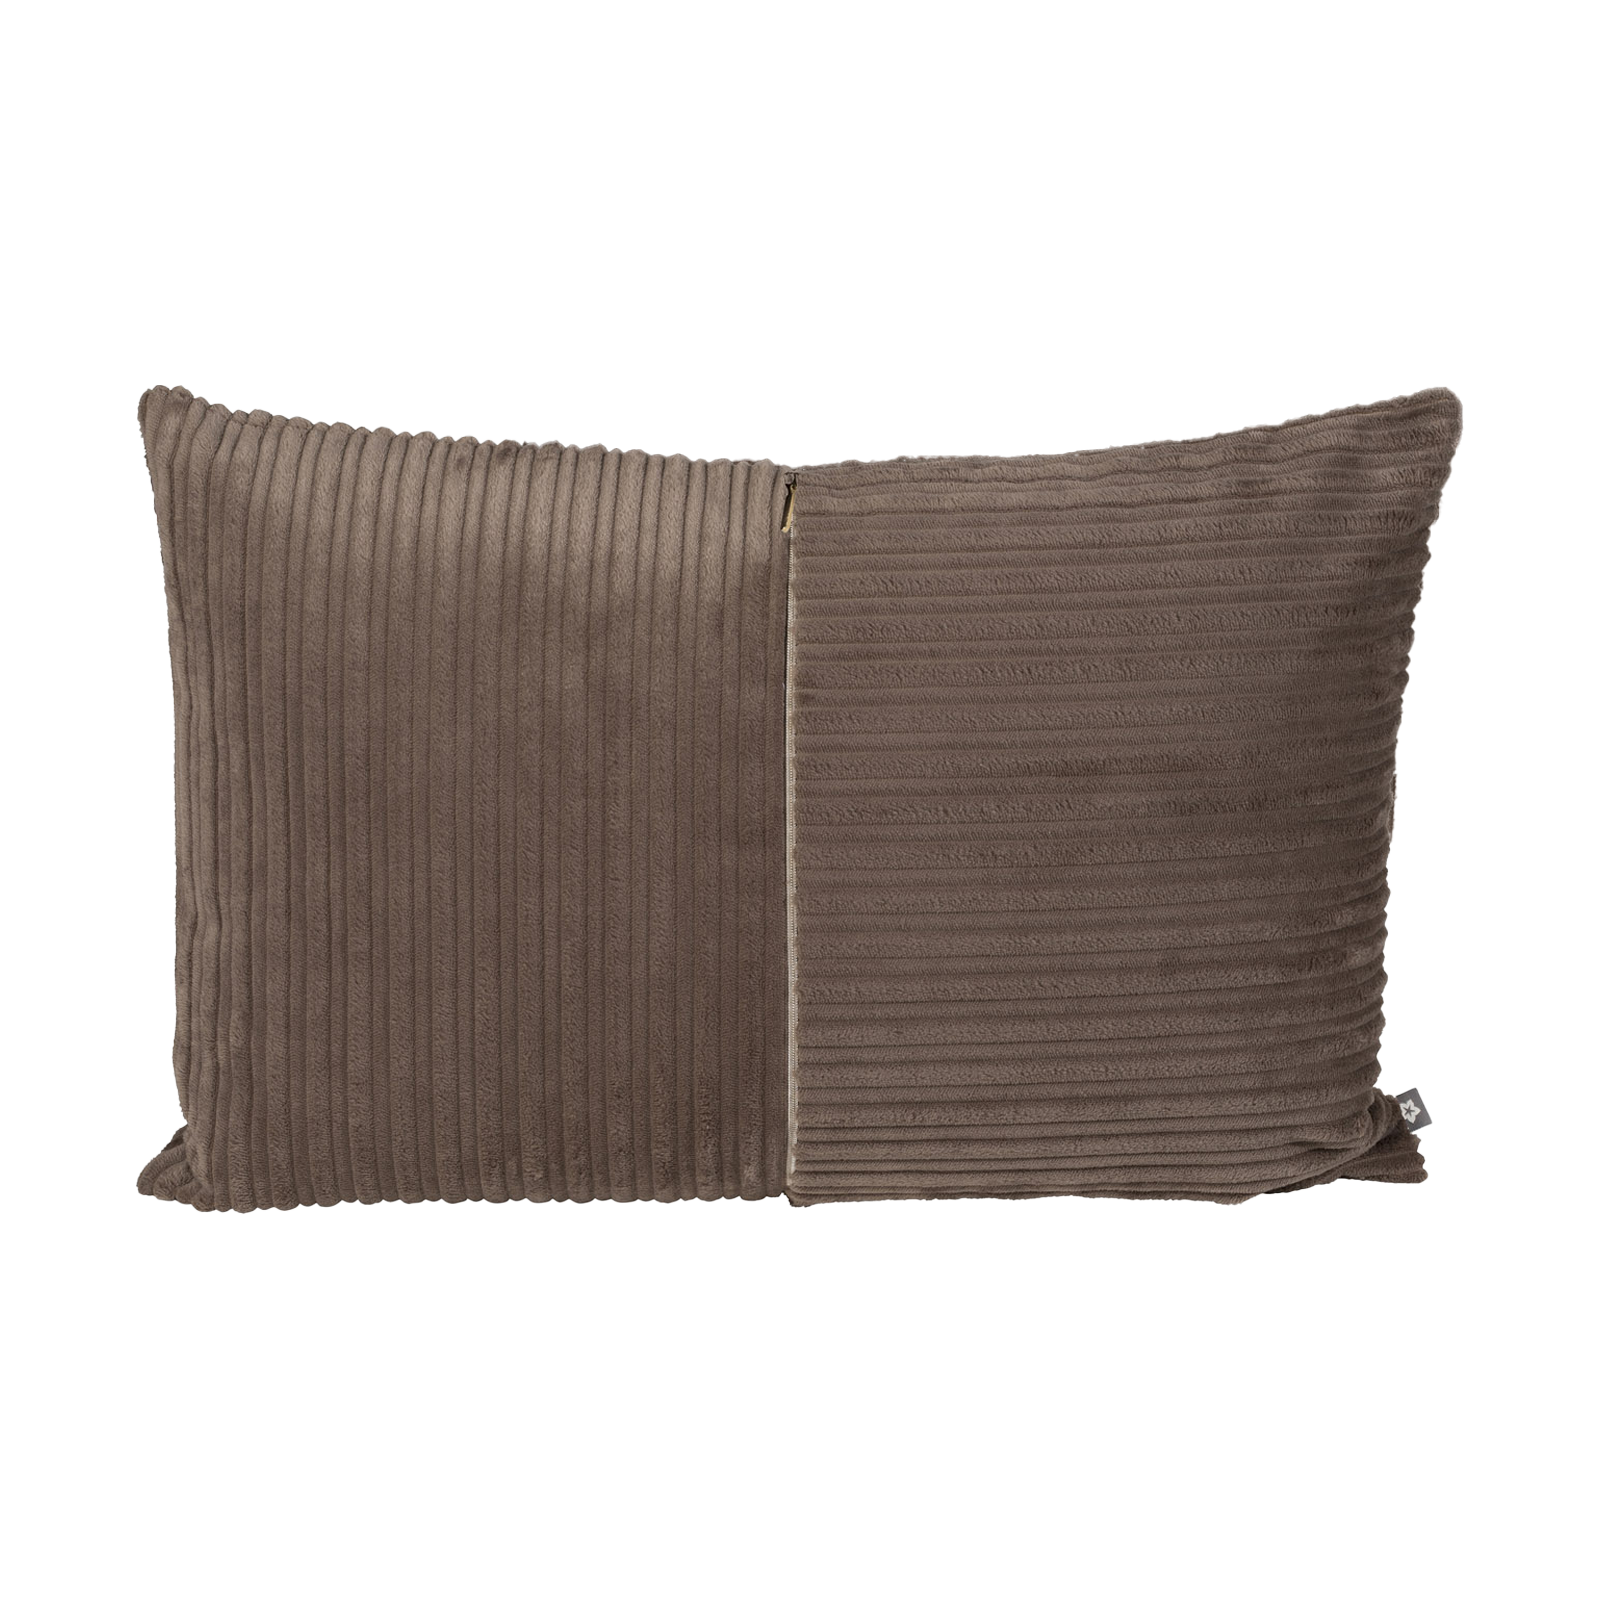 Größe: 40x 60 cm Farbe: taupe #farbe_taupe